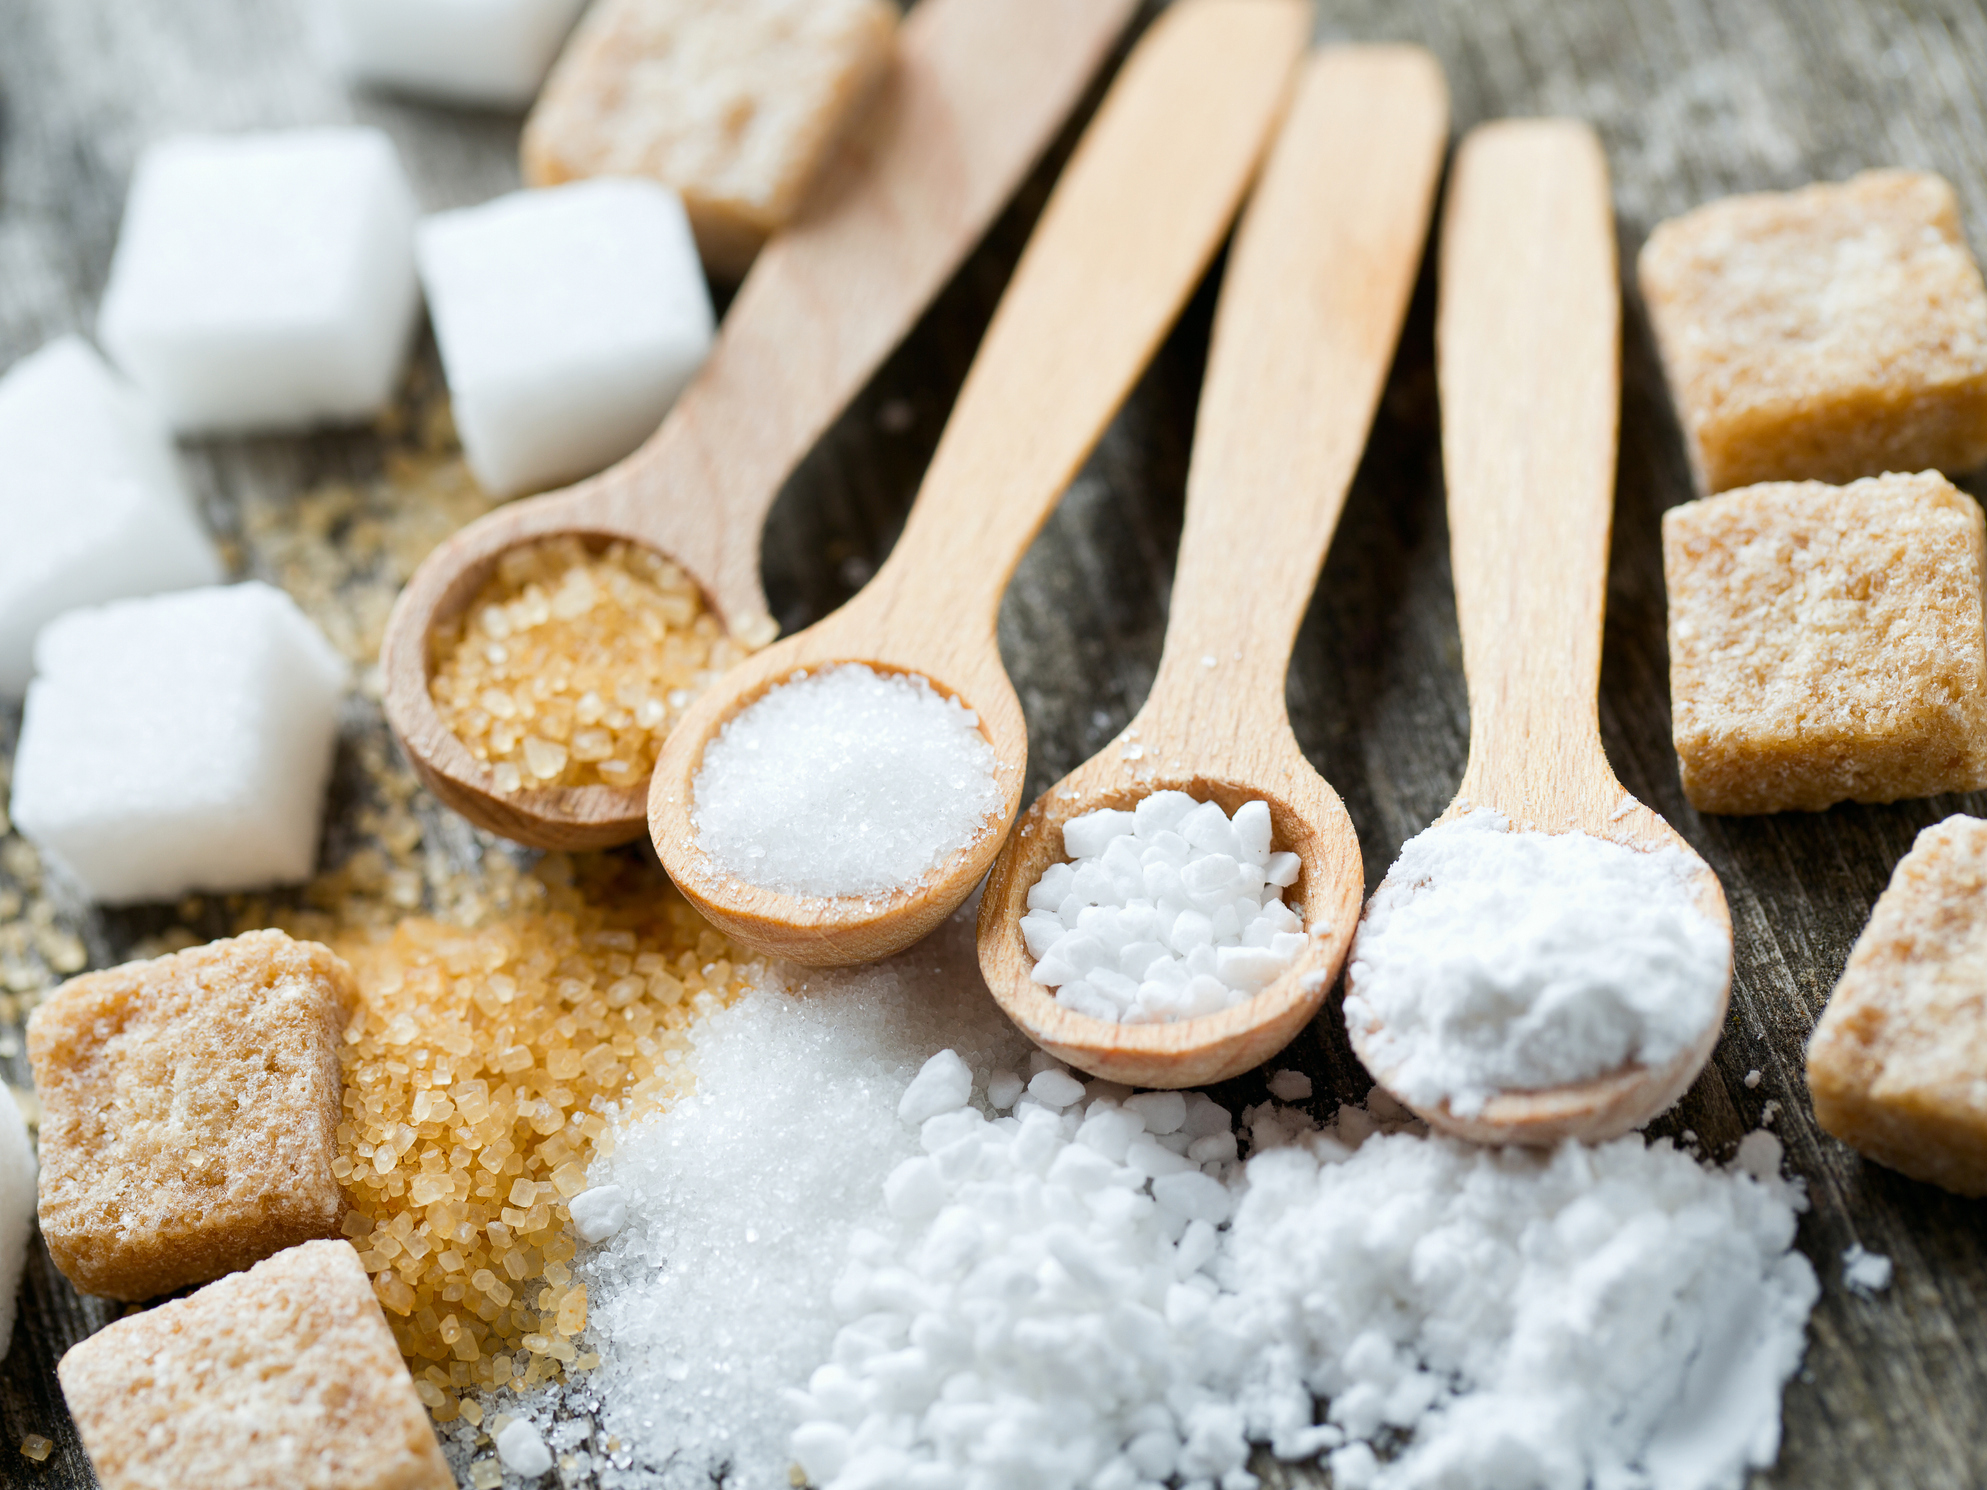 The sugar supplement that slowed tumor growth